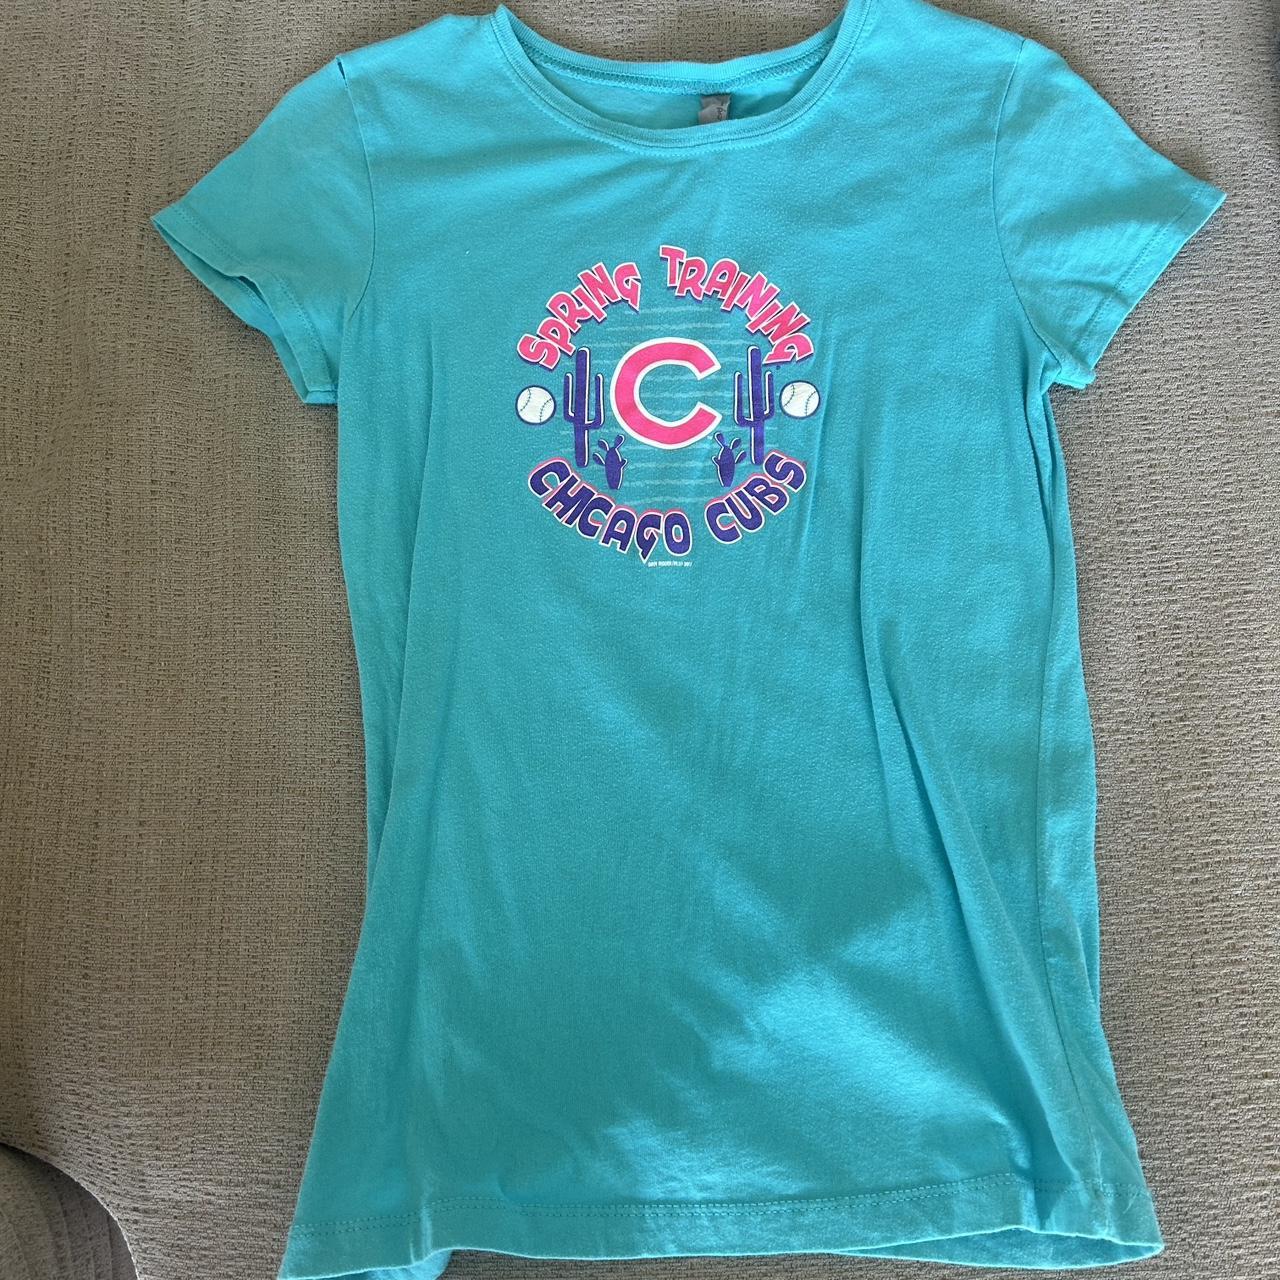 chicago cubs spring training t-shirt small hole on - Depop